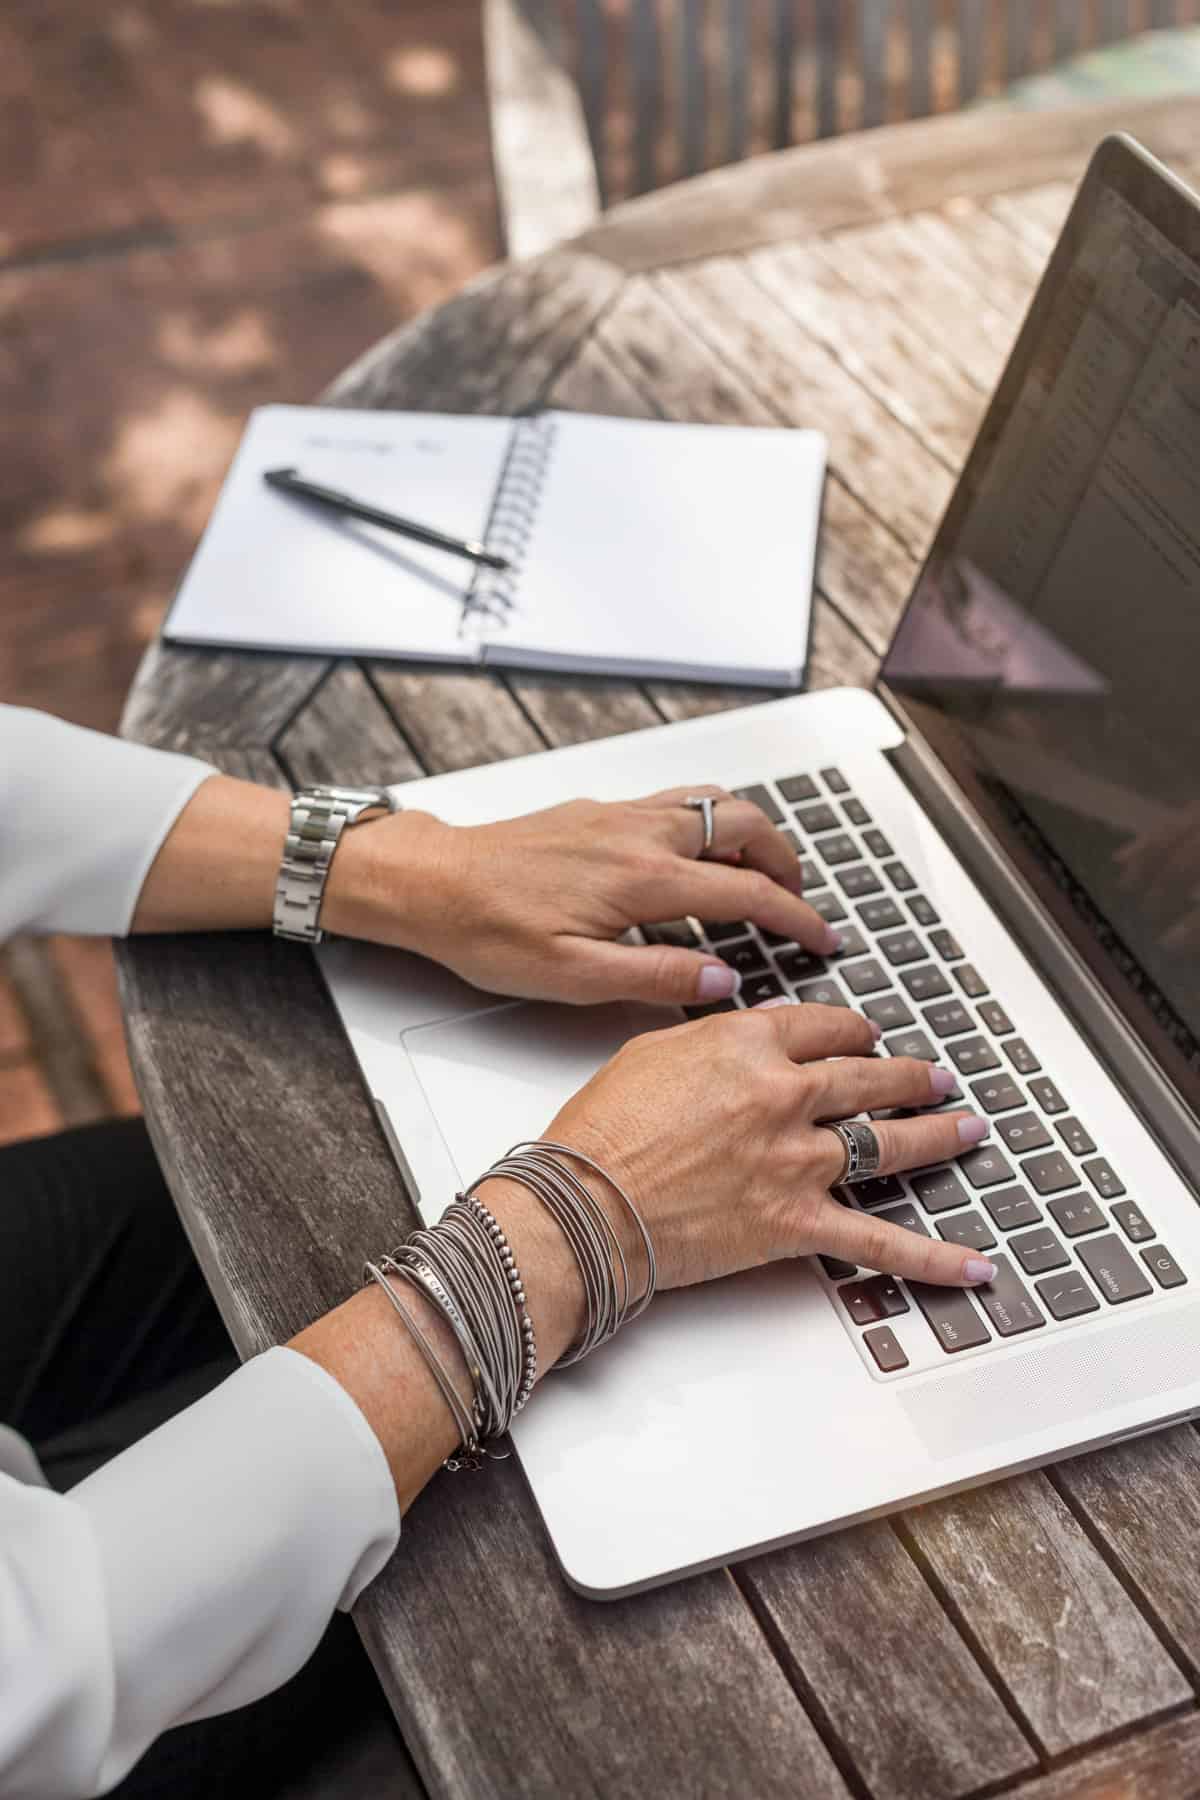 blogger typing on laptop with silver jewelry on